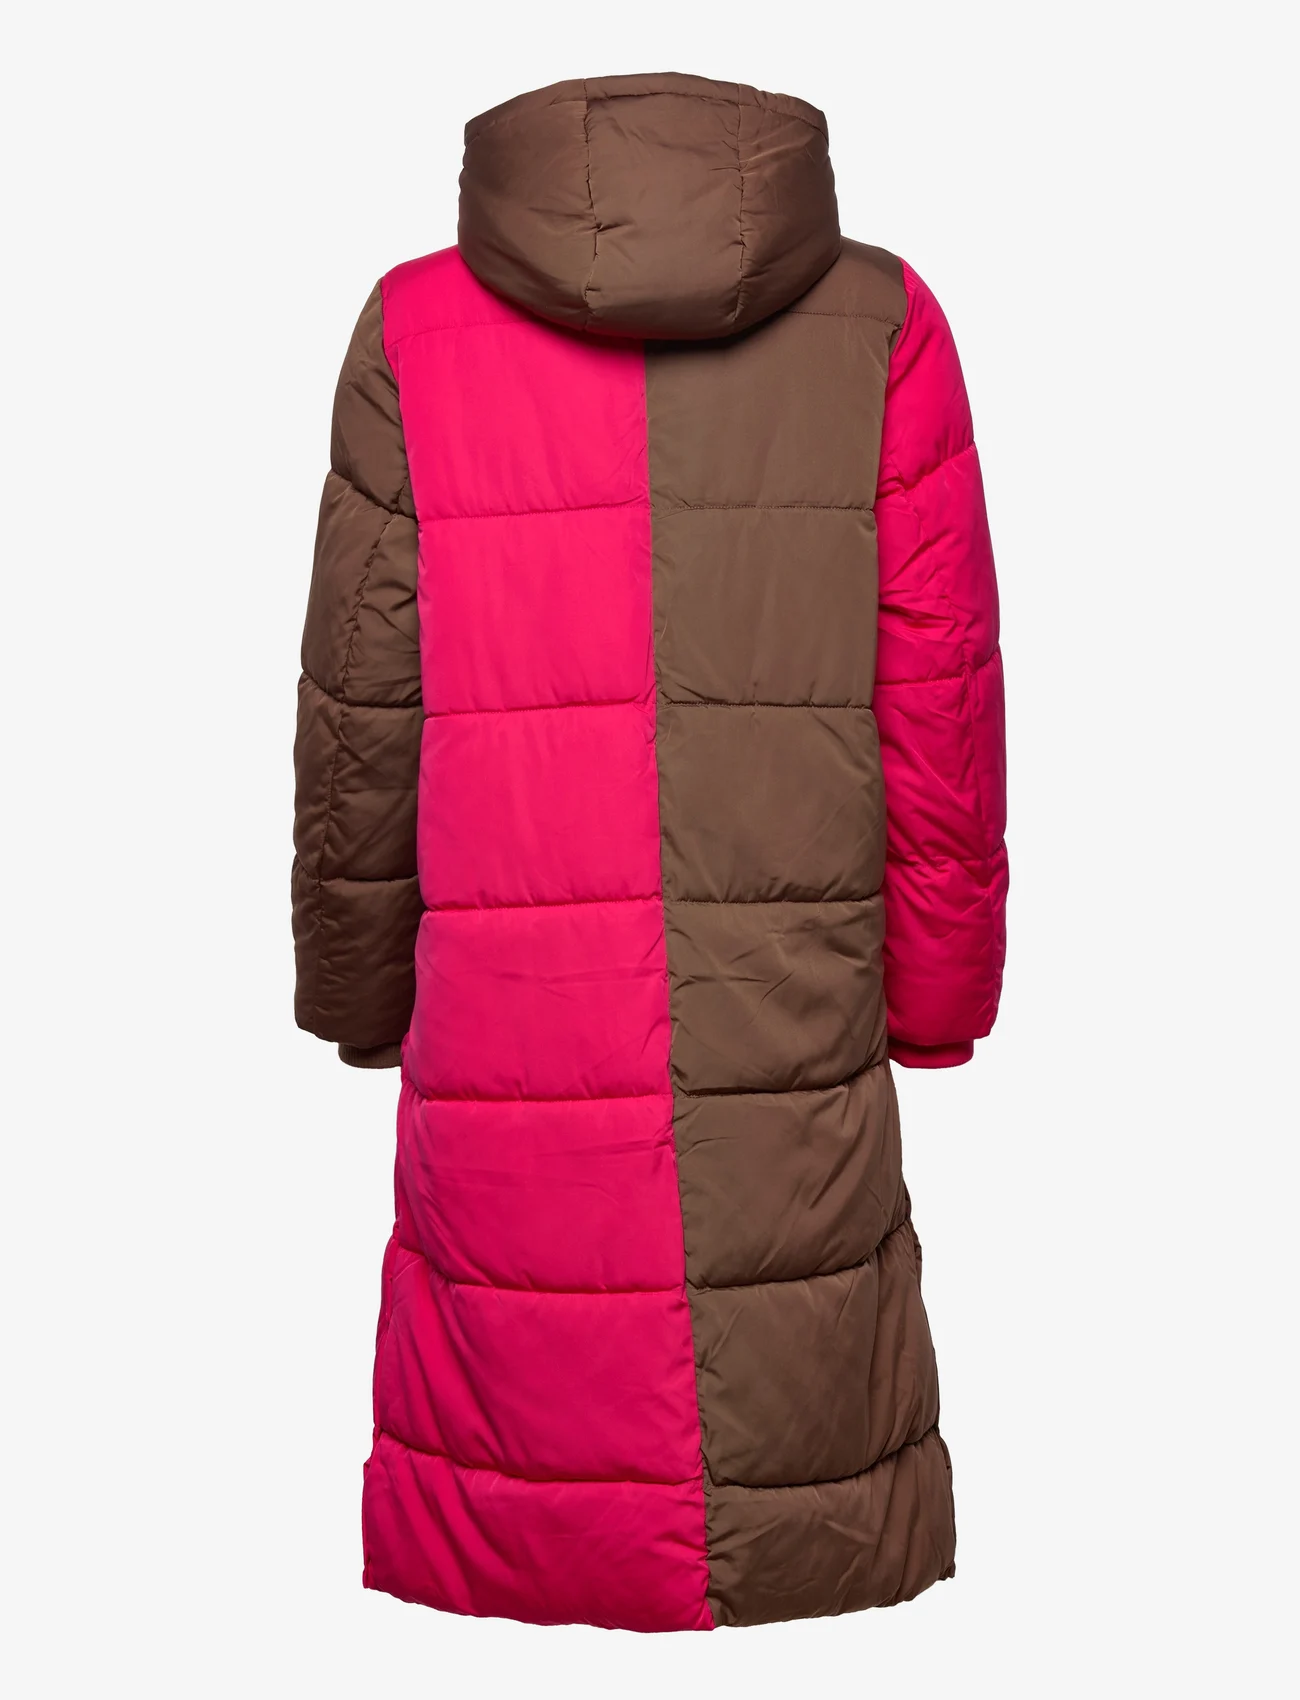 YAS - YASCECILIE PADDED JACKET - D2D - winter jackets - beetroot purple - 1